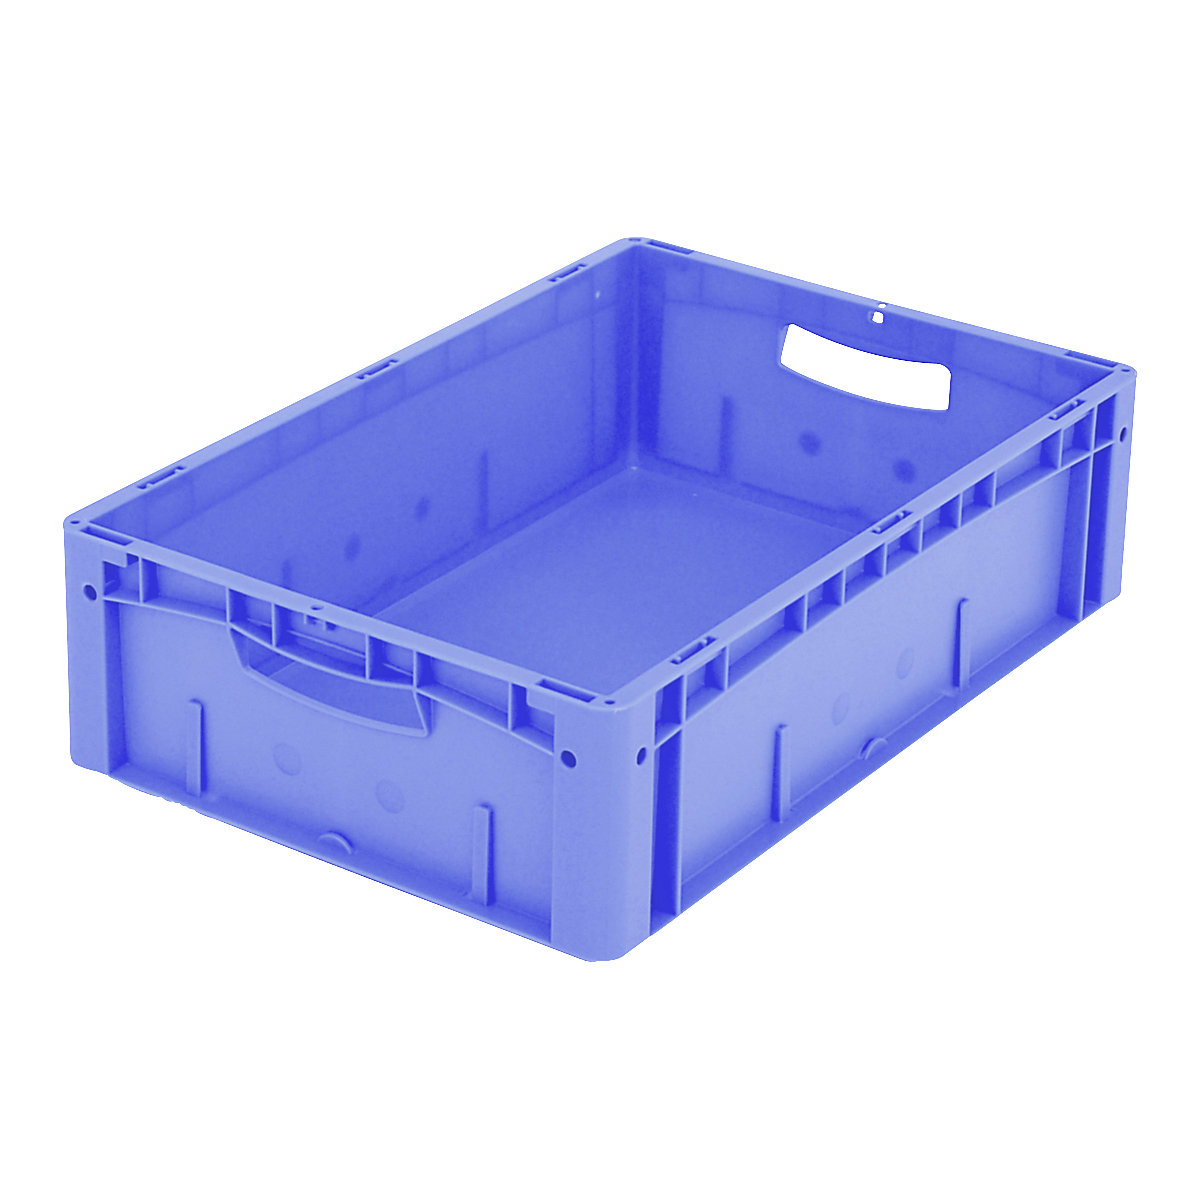 XL Euro stacking container – BITO, standard model, LxWxH 600 x 400 x 170 mm-12